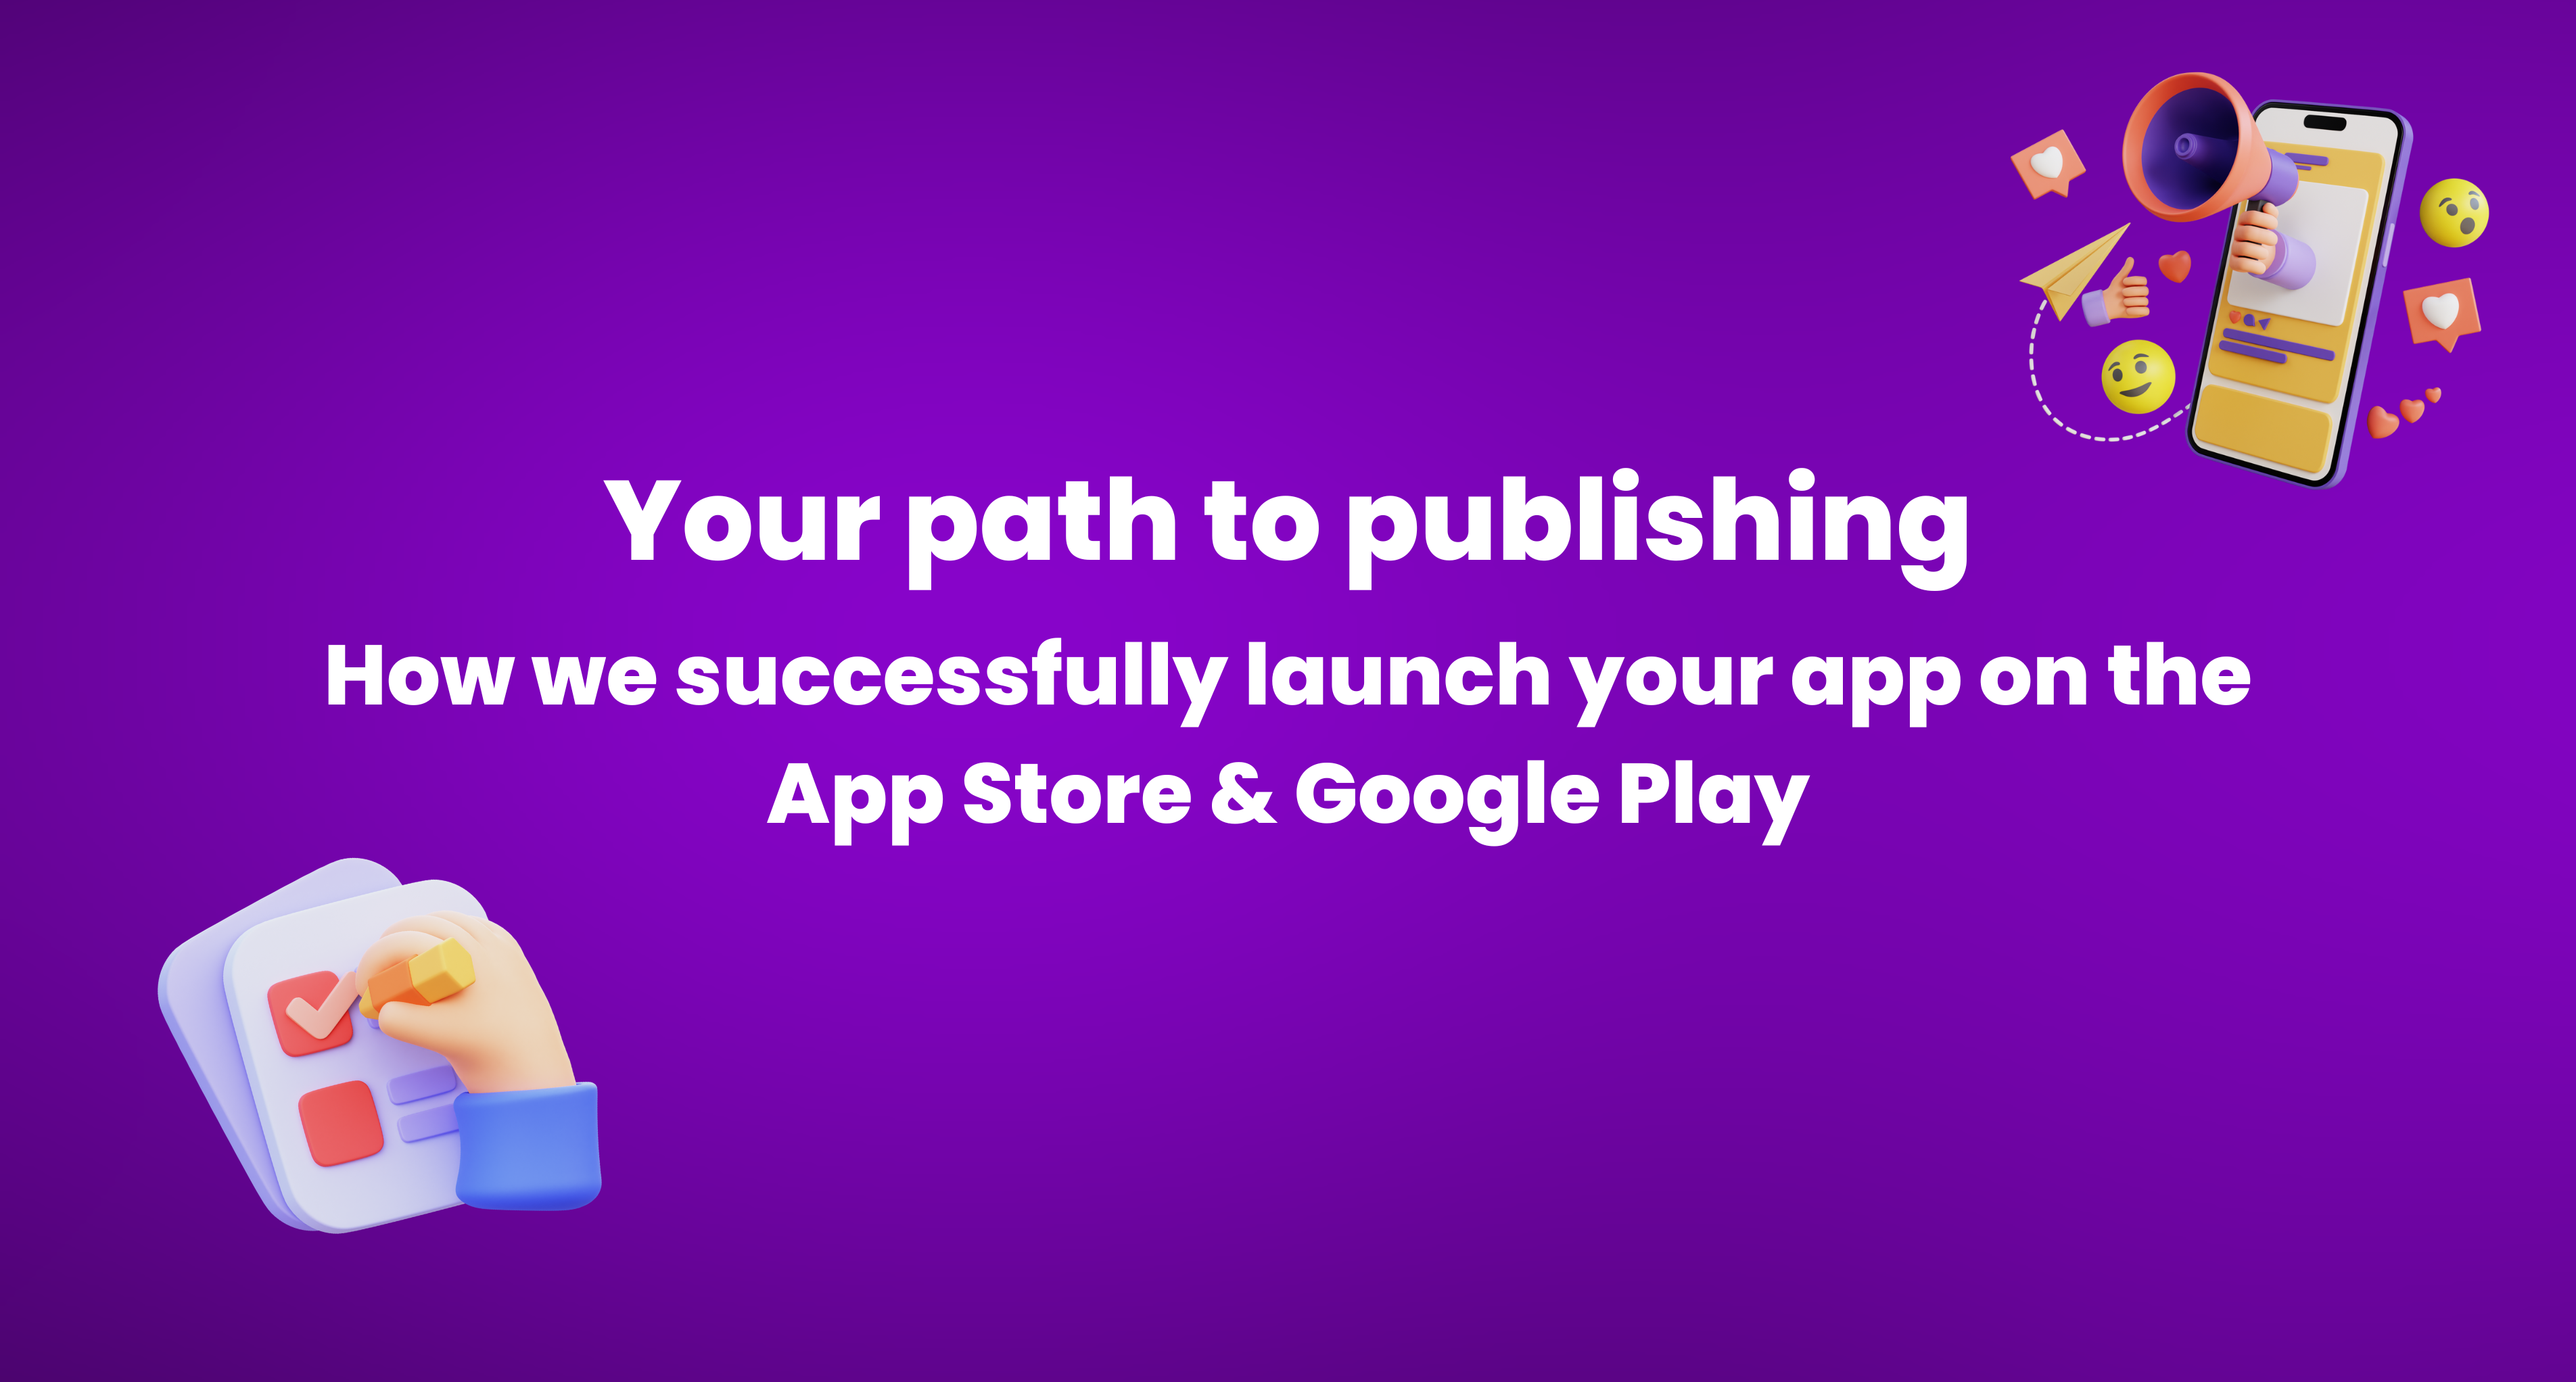 Nightborn - A path to publishing - How we launch your app